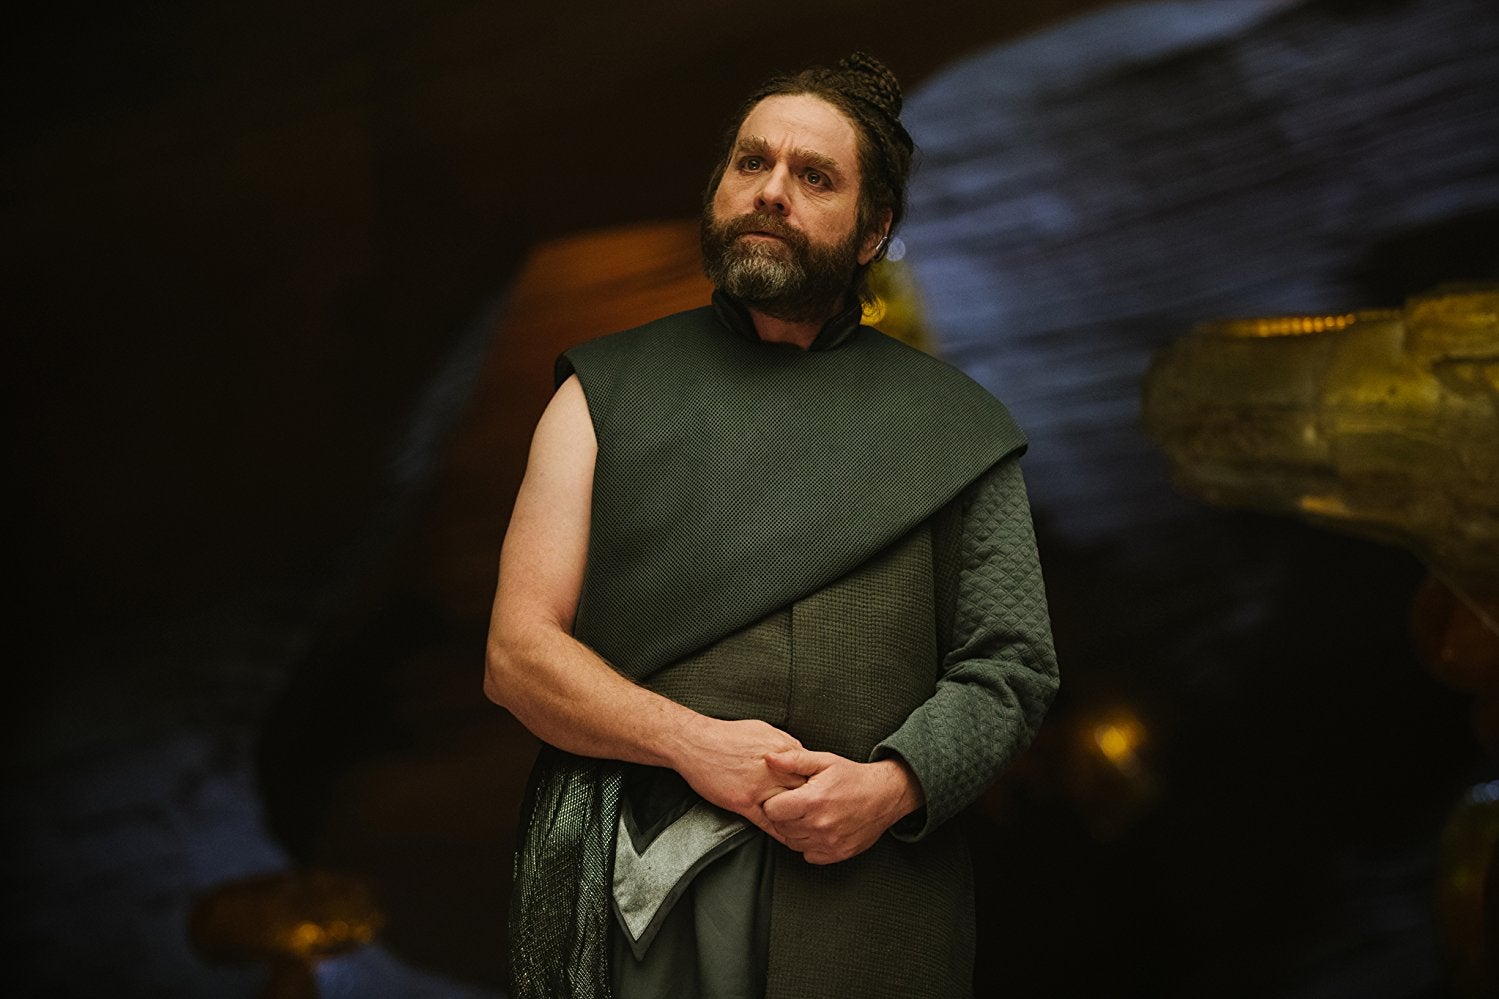 Zach Galifianakis plays the Happy Medium in A Wrinkle in Time.